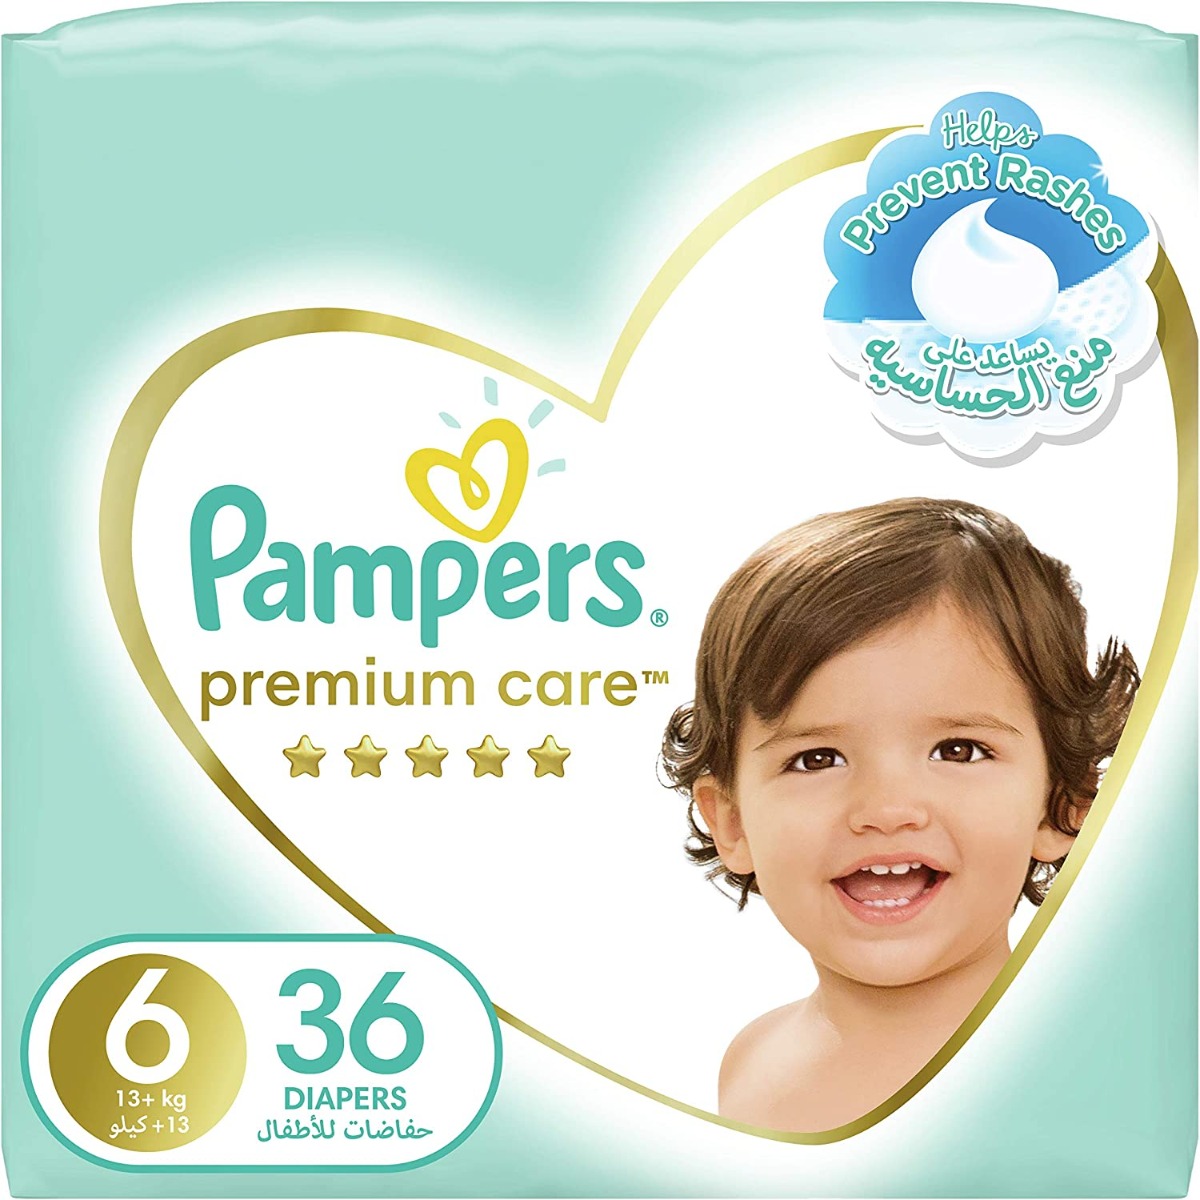  Pampers Premium Care Micro (1 - 2.5kg) 30 Diapers